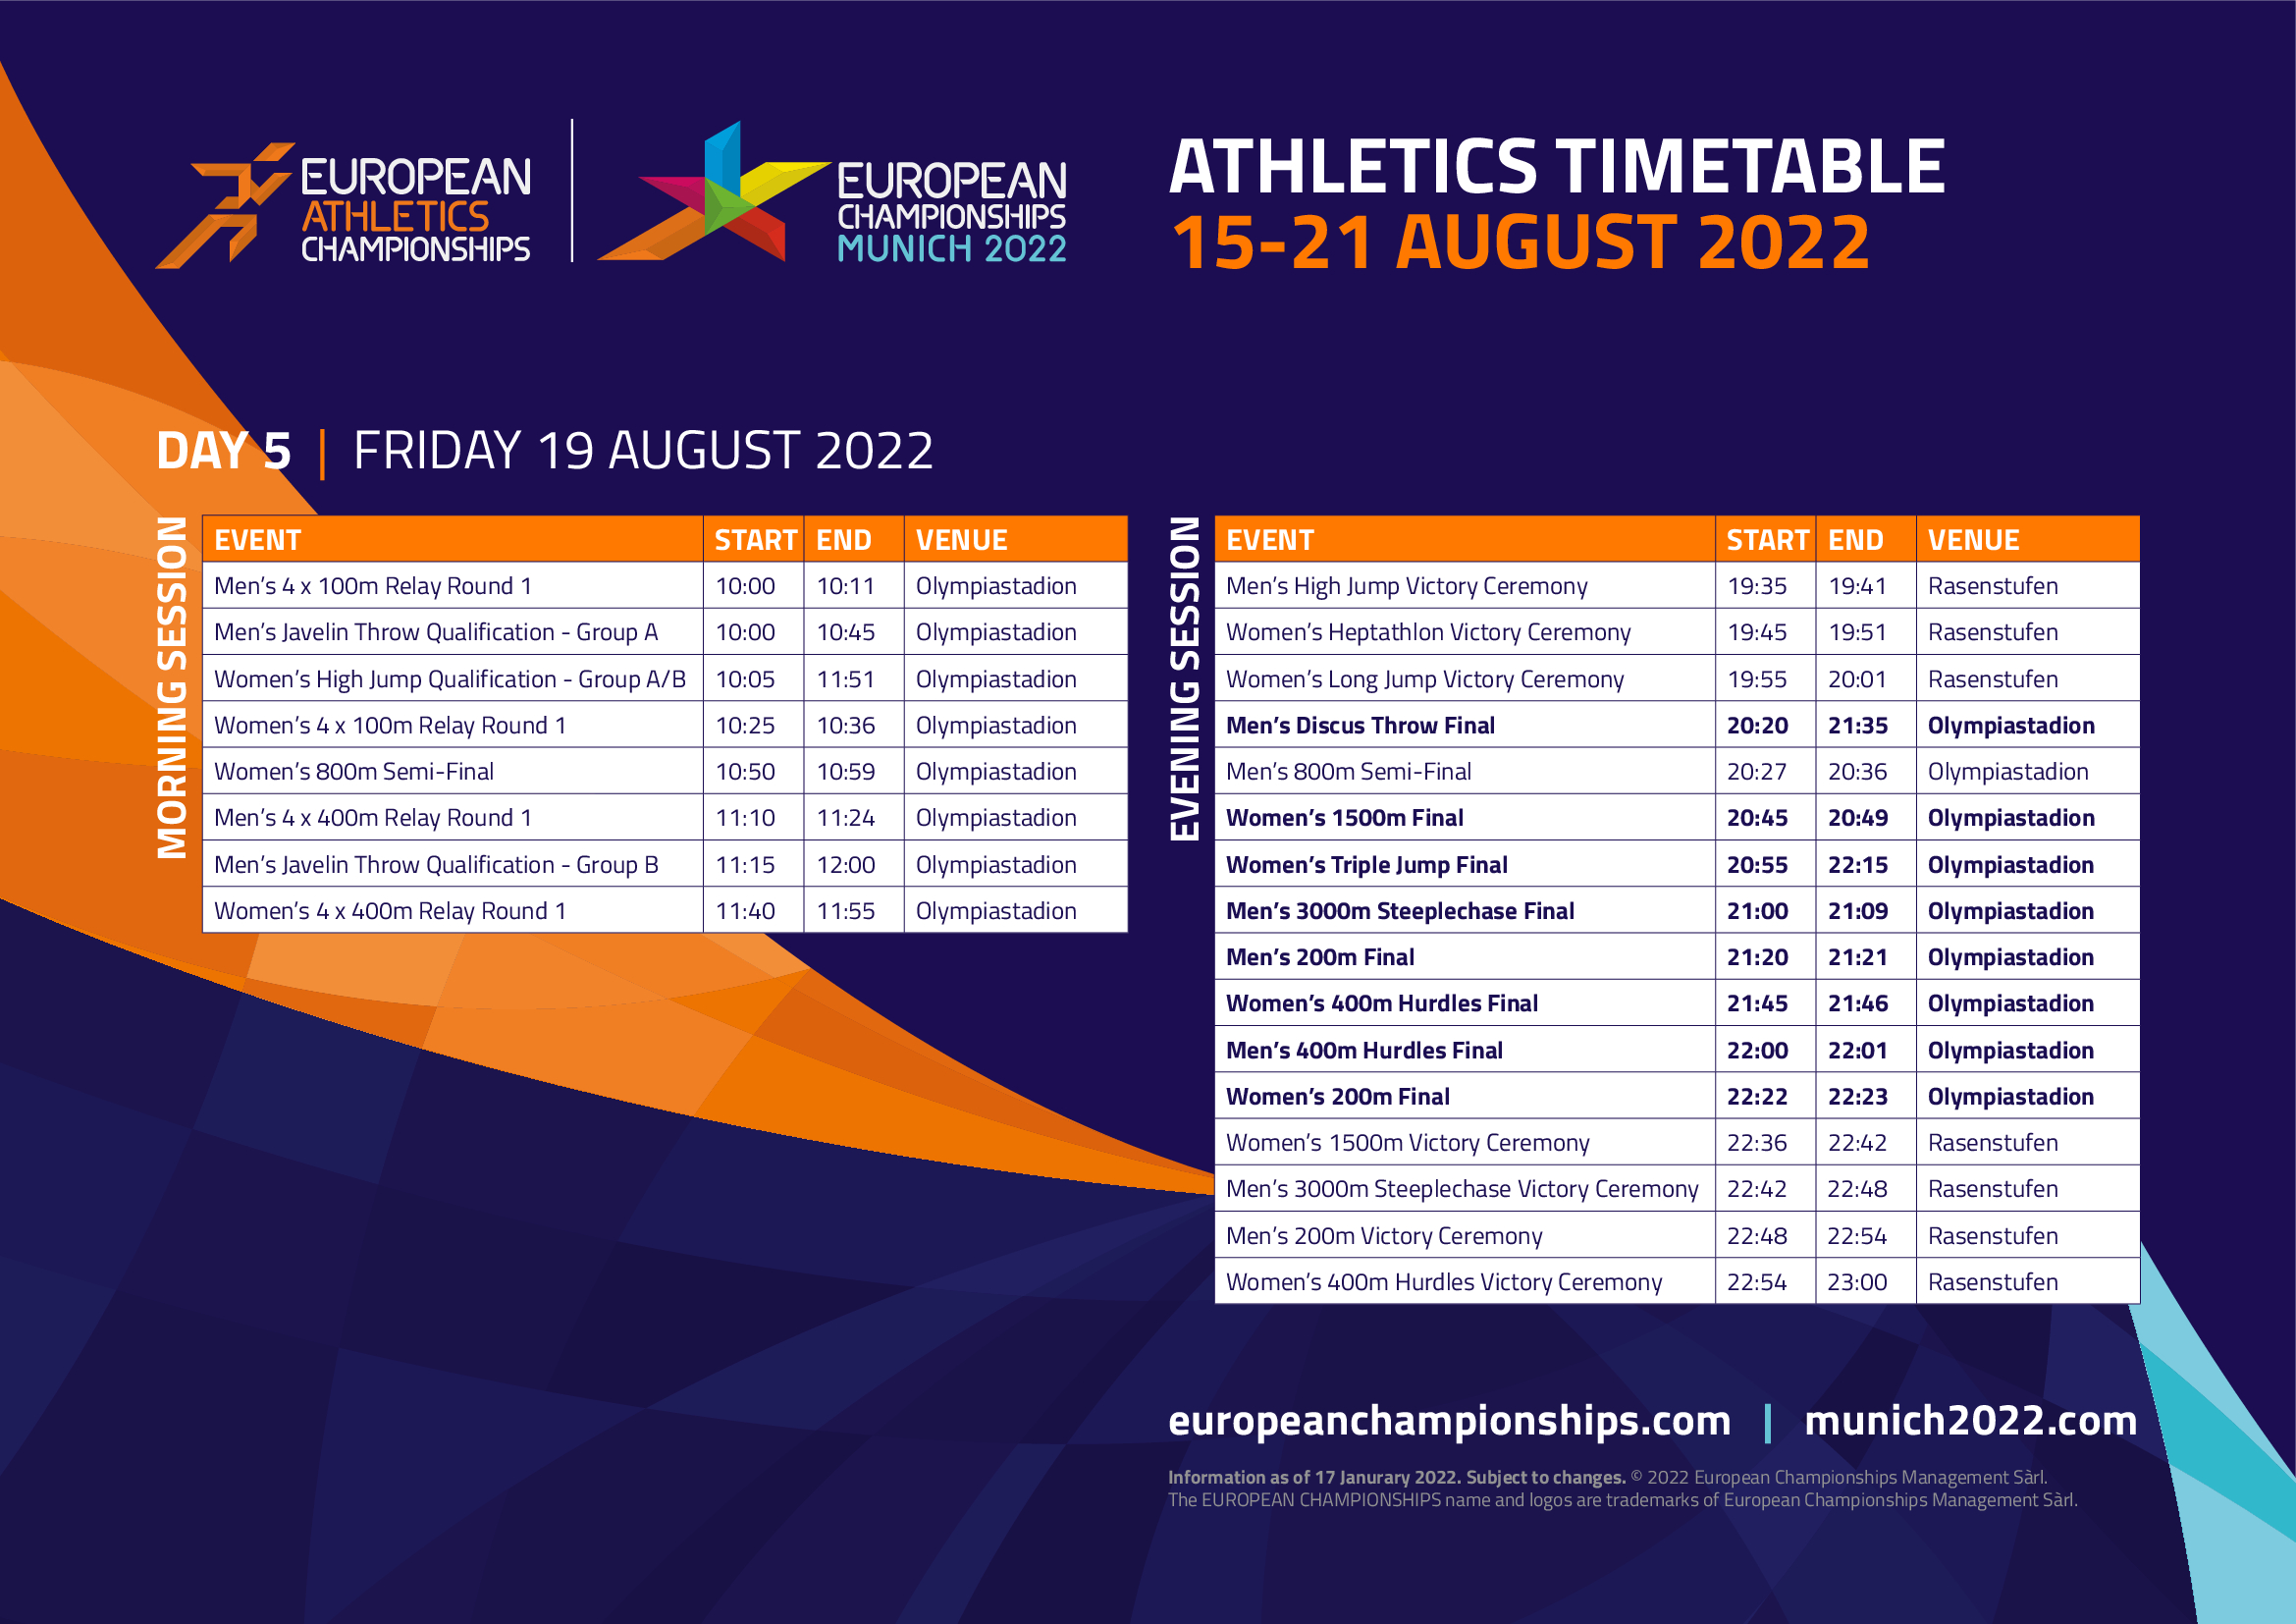 European Athletics Championships 2022 when is it and where is it held?